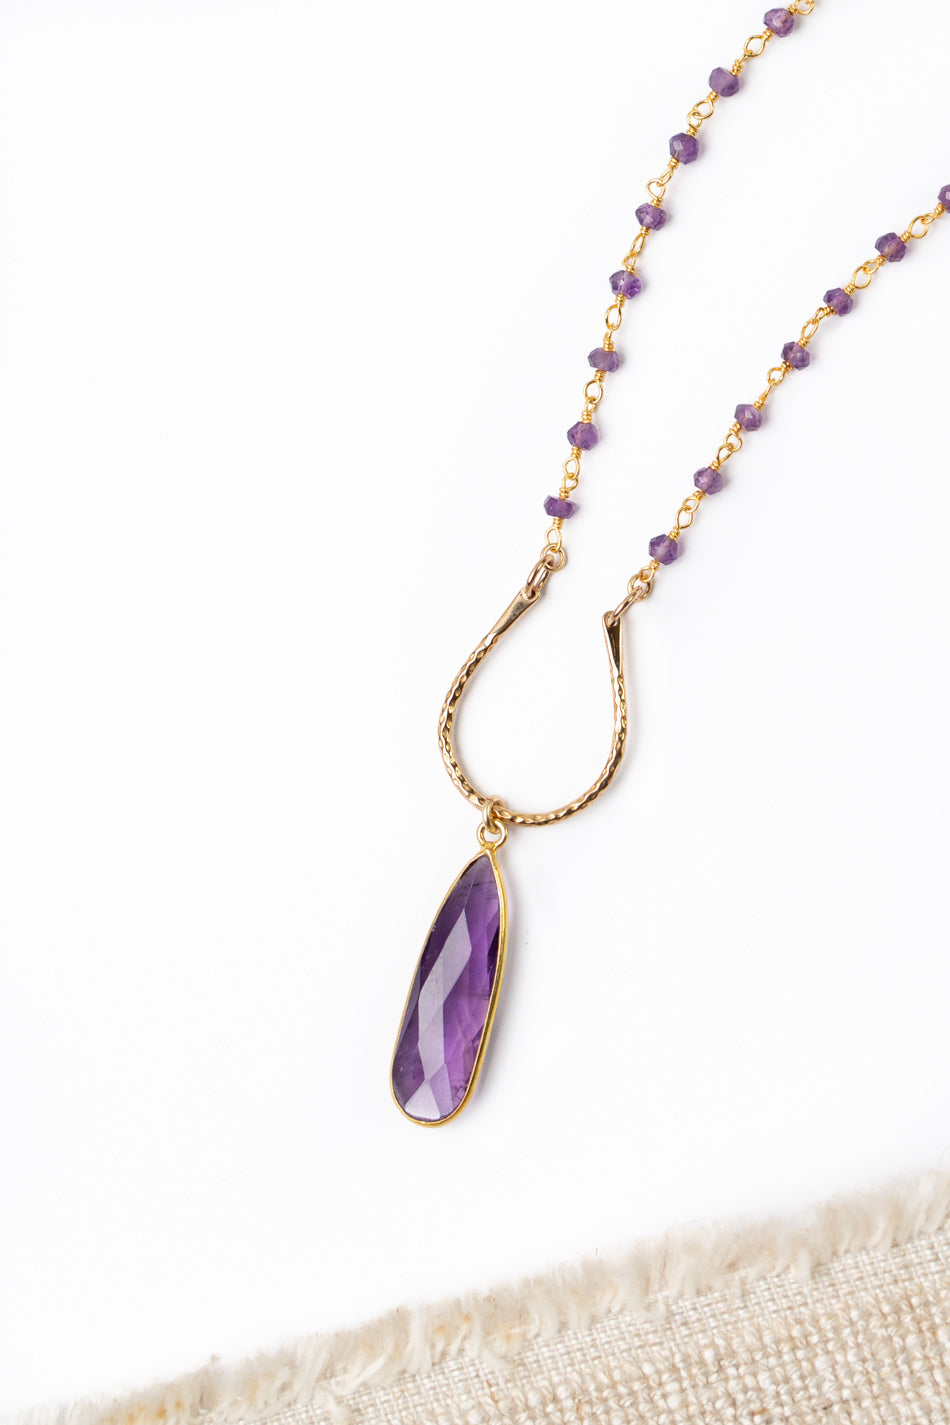 Limited Edition 19.75-21.75" Amethyst Statement Necklace